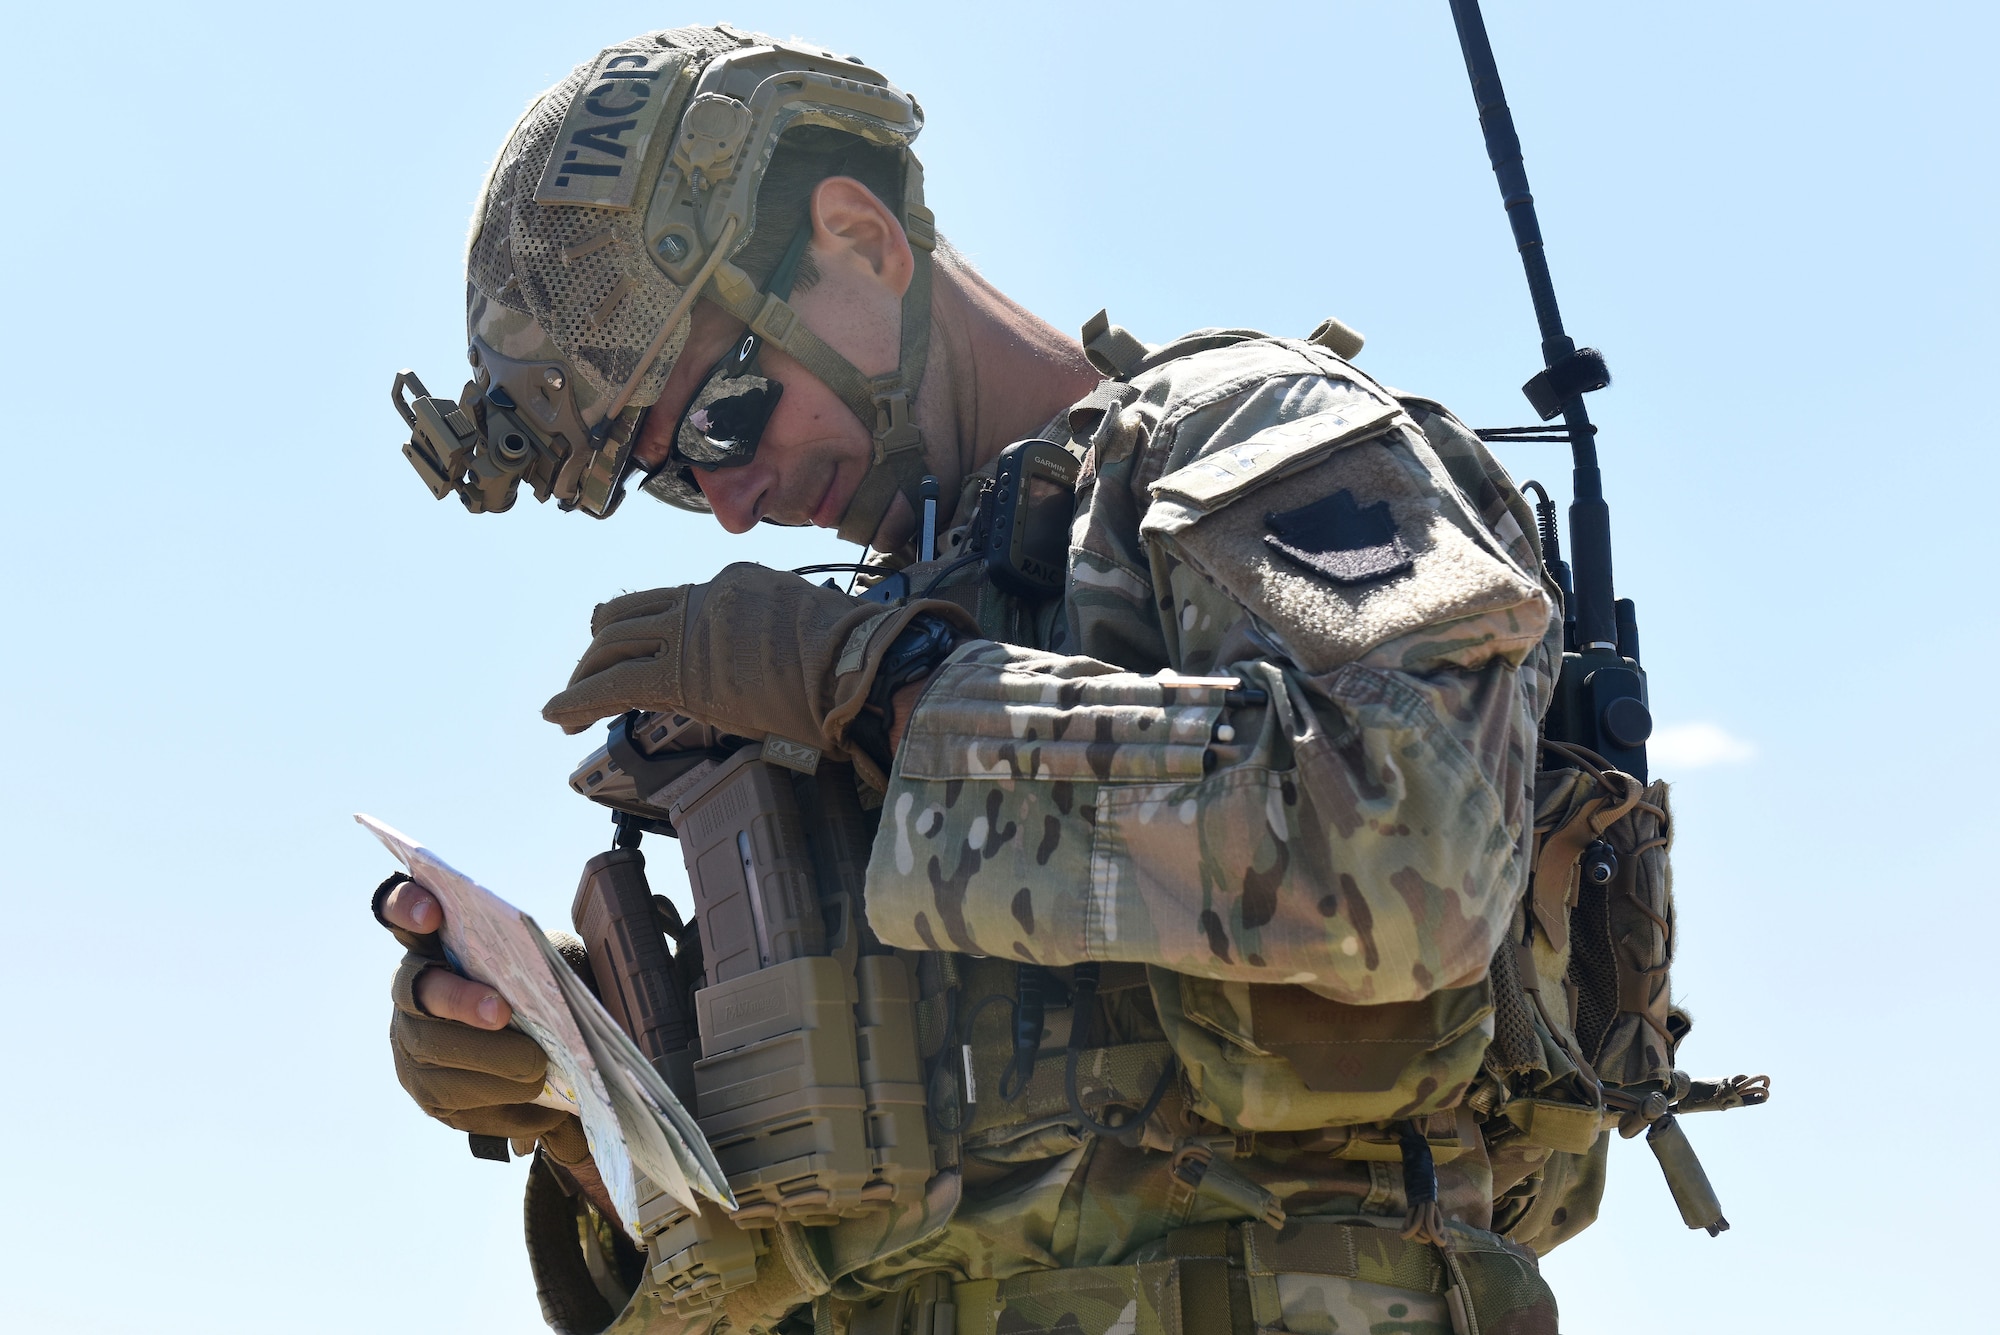 Senior Airman Zeljko Raic, a Tactical Air Control Party Specialist with the 148th Air Support Operations Squadron, checks his coordinates.